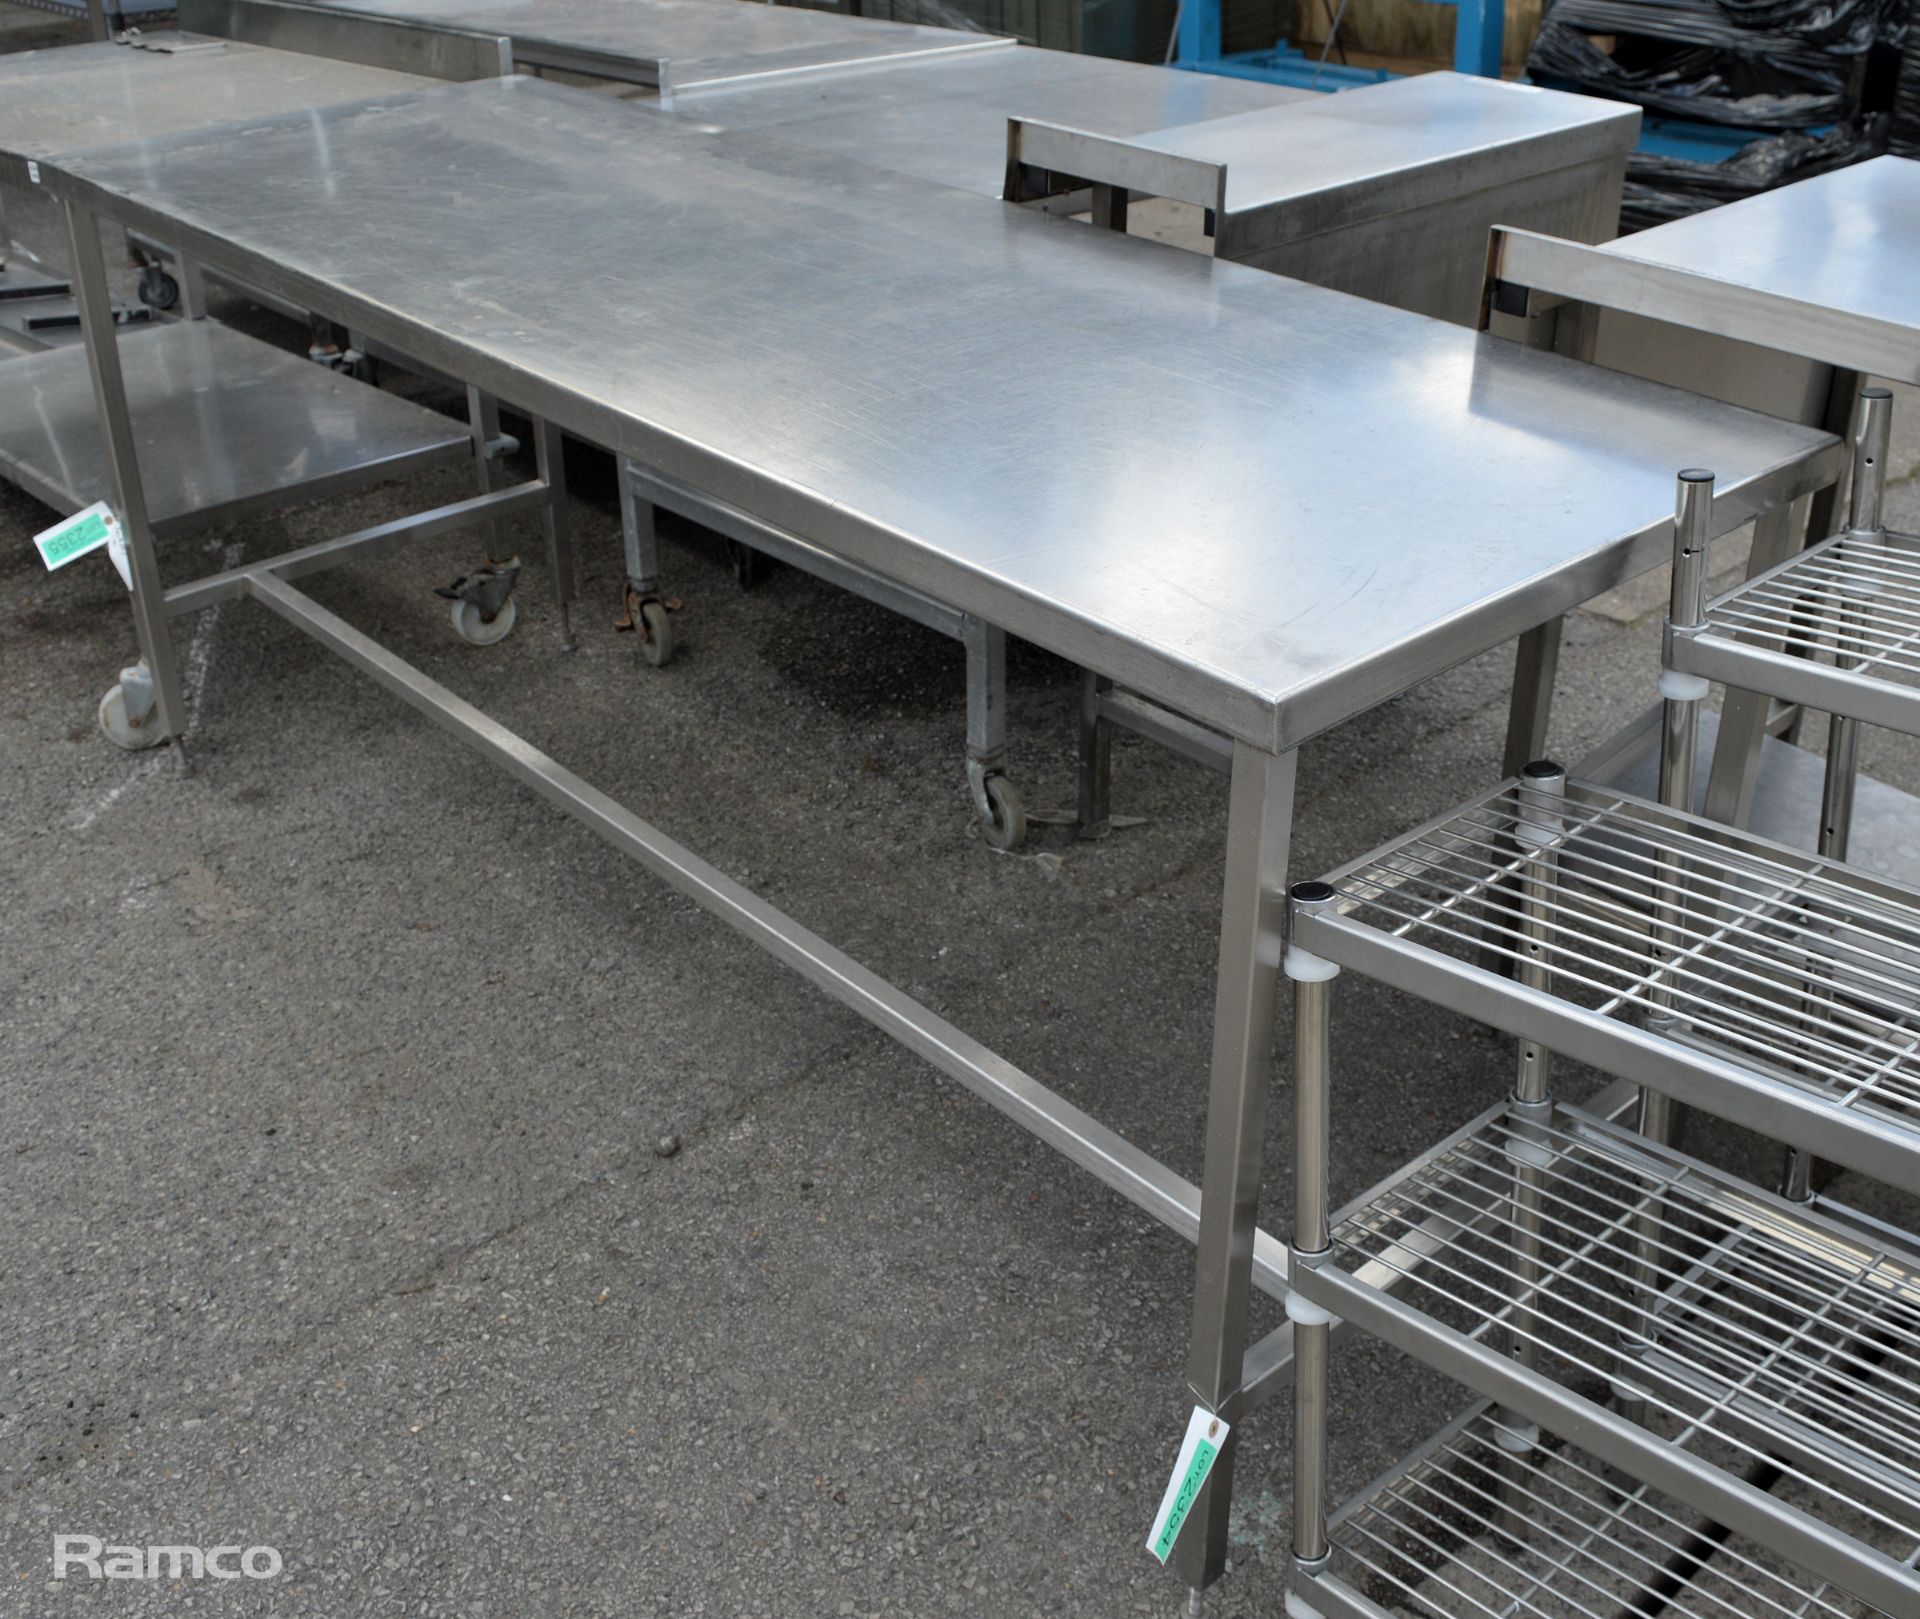 Stainless steel counter/worktop 200 x 70 x 85 - Image 2 of 3